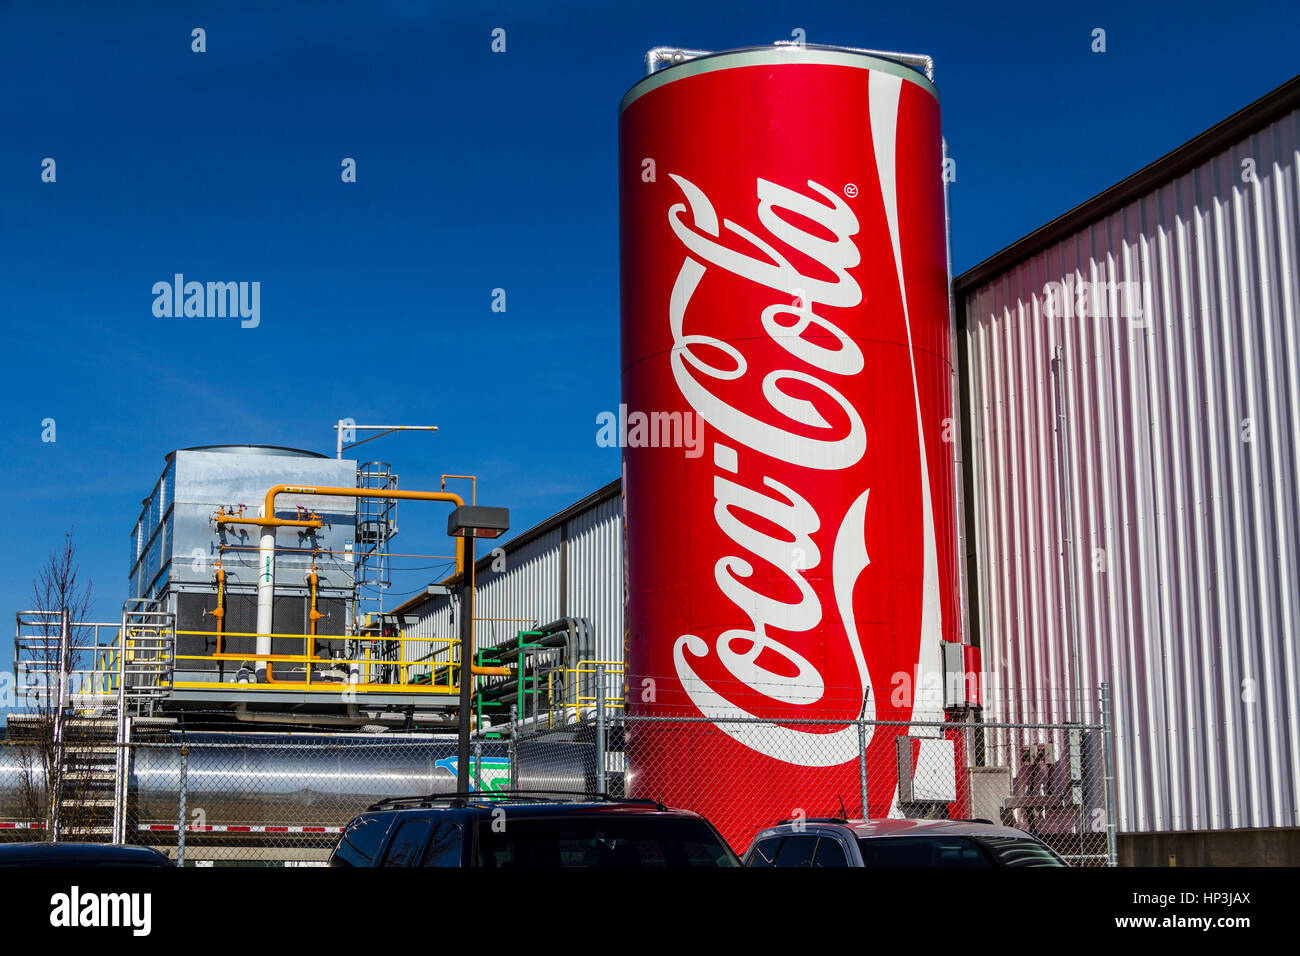 Indianapolis - Circa February 2017: Giant Can of Coca Cola adorns the Bottling Plant. Coke products are among the best selling soft drinks in the US X Stock Photo